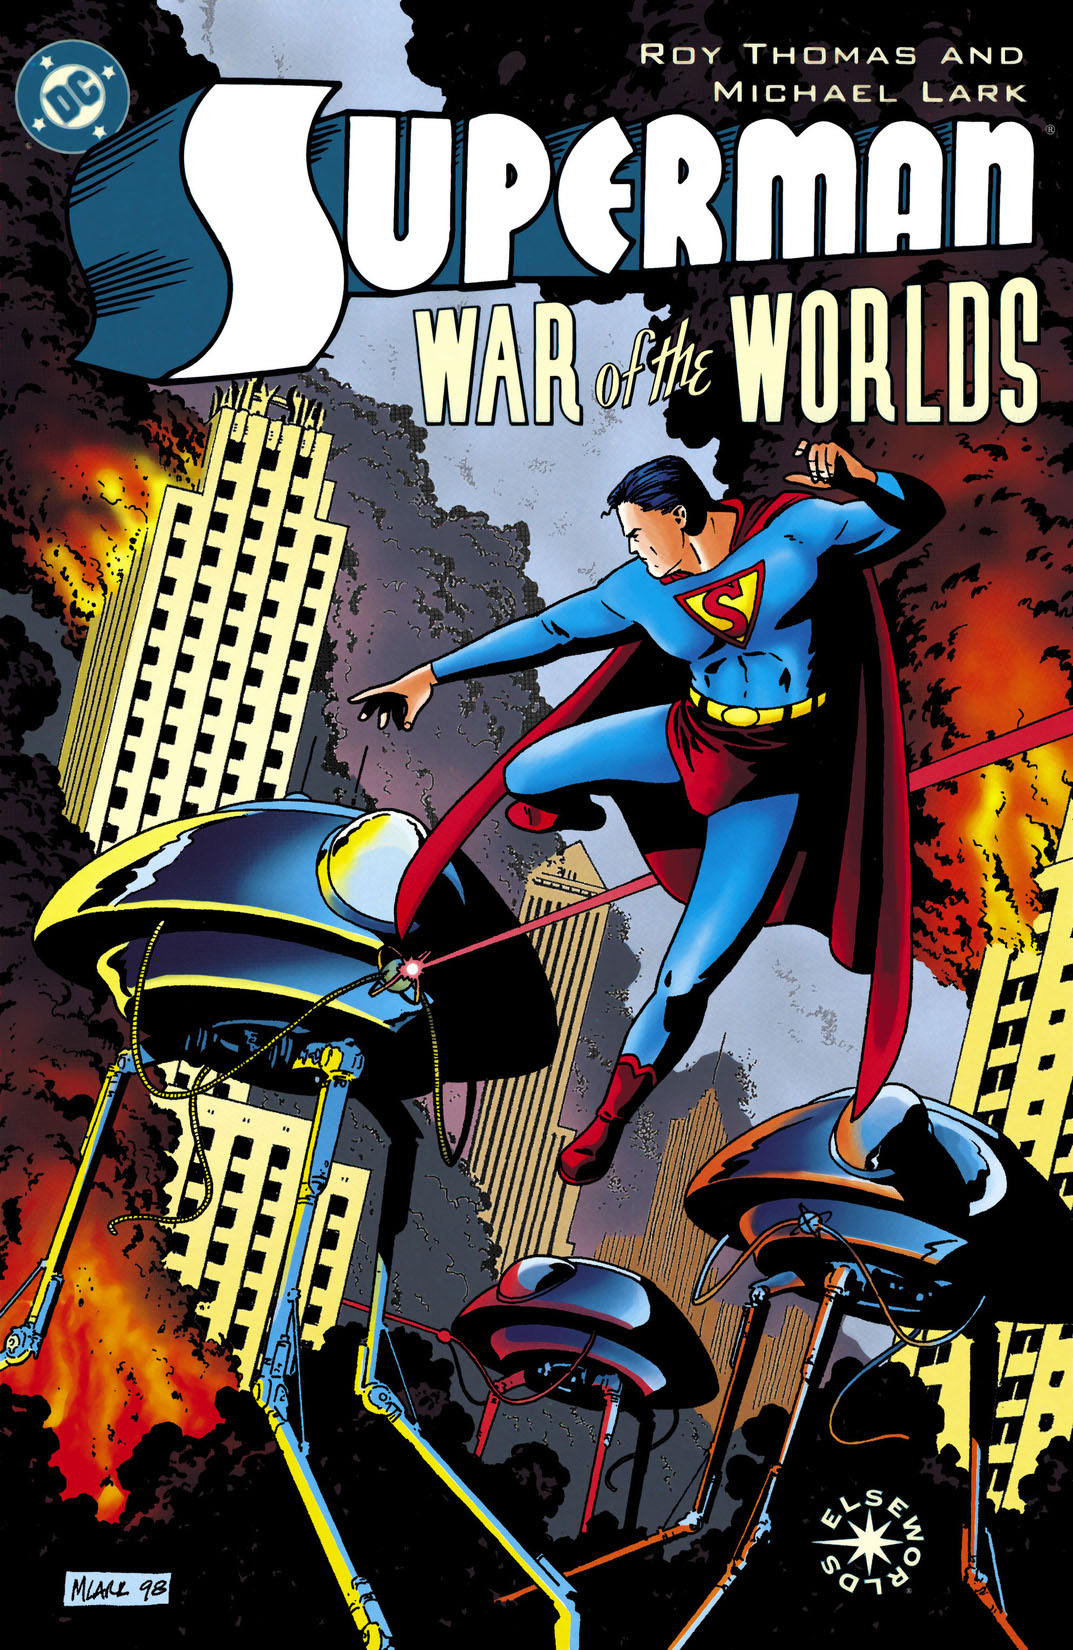 Superman: War of the Worlds #1 preview images